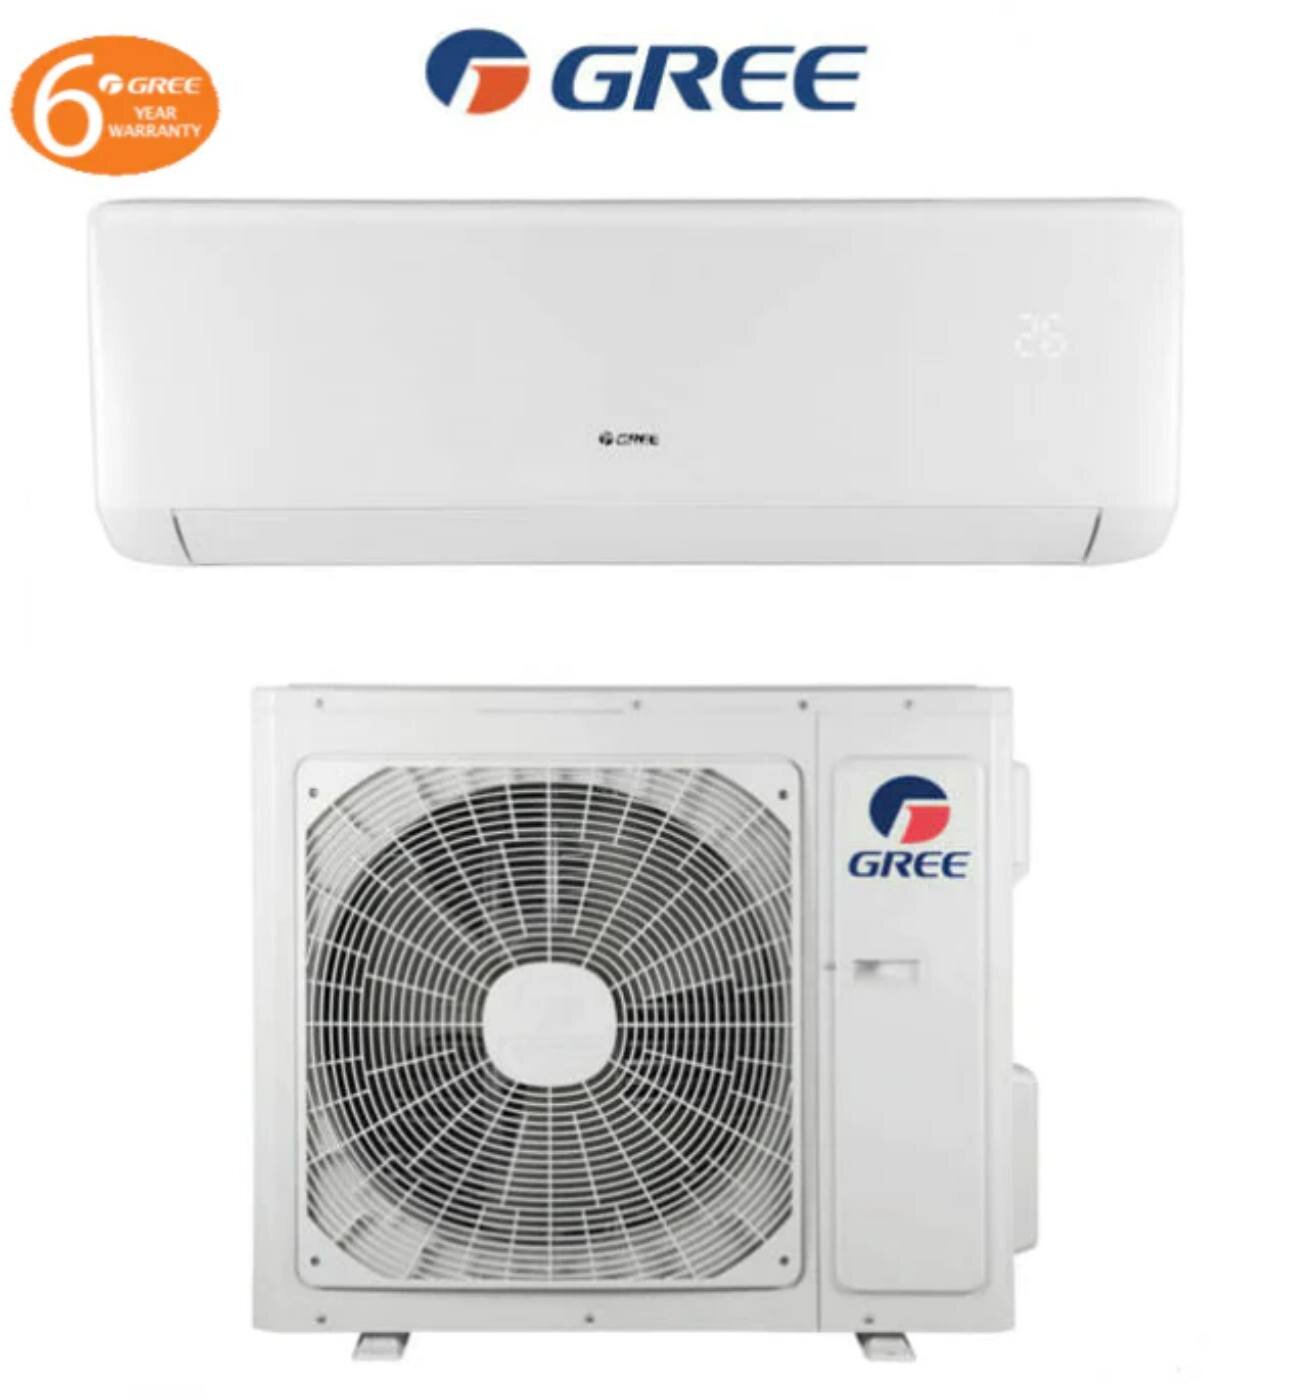 Supplied &amp; Installed 3.4KW Gree Split System Air Conditioner $1450
&ldquo;This price is for back to back installations for Supply &amp; Install 3.4KW Gree Split System Air Conditioner&rdquo;

QUIET AND ENERGY EFFICIENT

Gree Bora features intelli